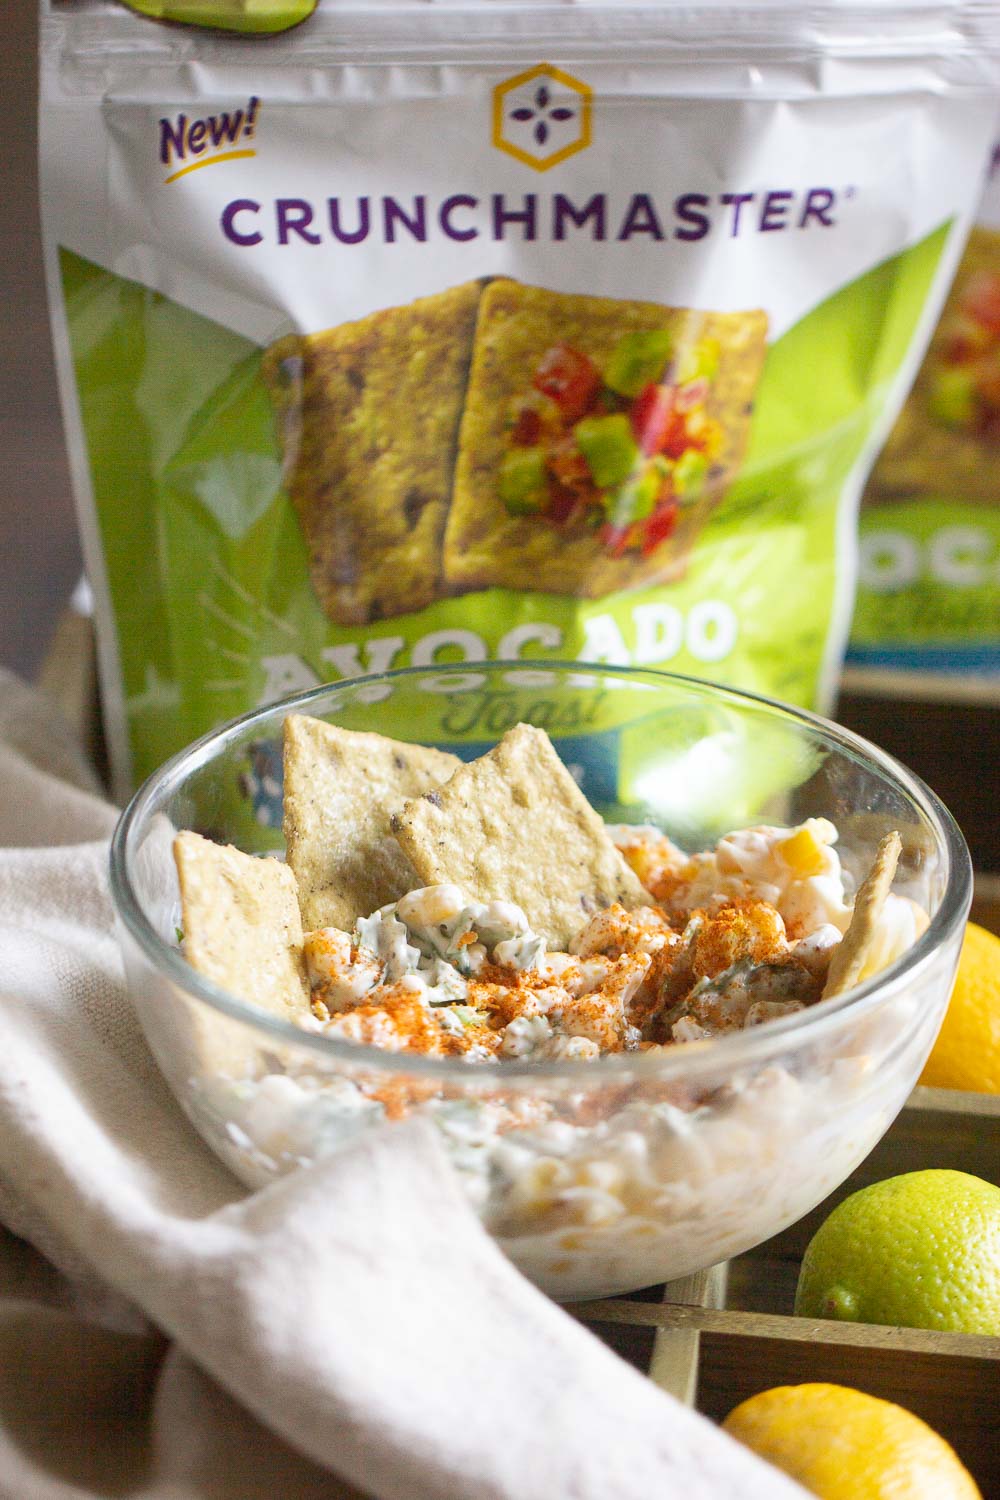 It’s time for Mexican Fiesta! I never need an excuse for Mexican food, so get ready for some fun Cinco de Mayo food ideas you need to make with Crunchmaster Crackers.